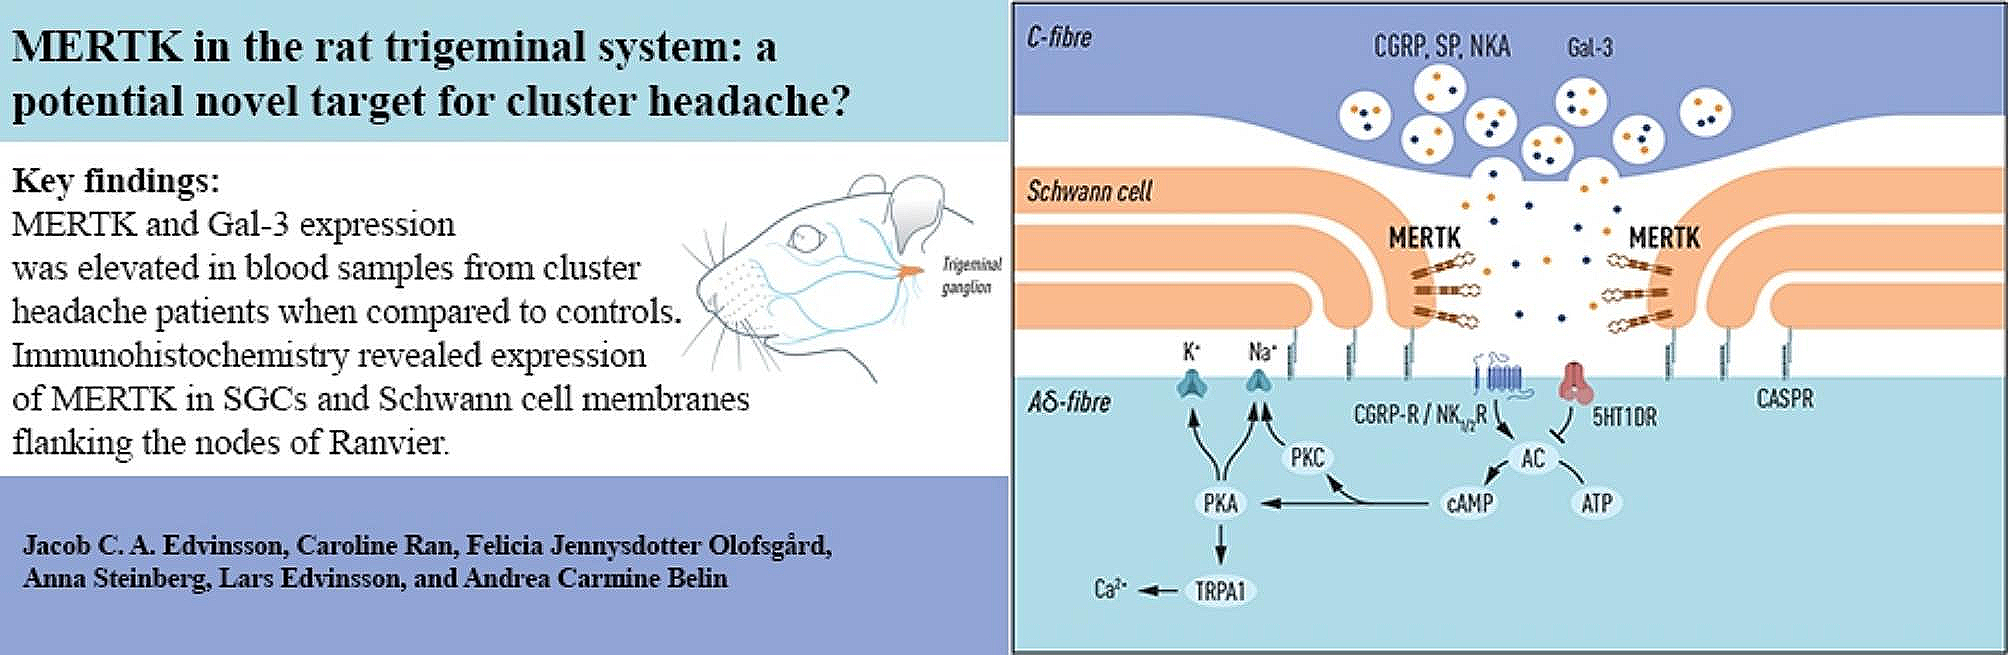 MERTK in the rat trigeminal system: a potential novel target for cluster headache?